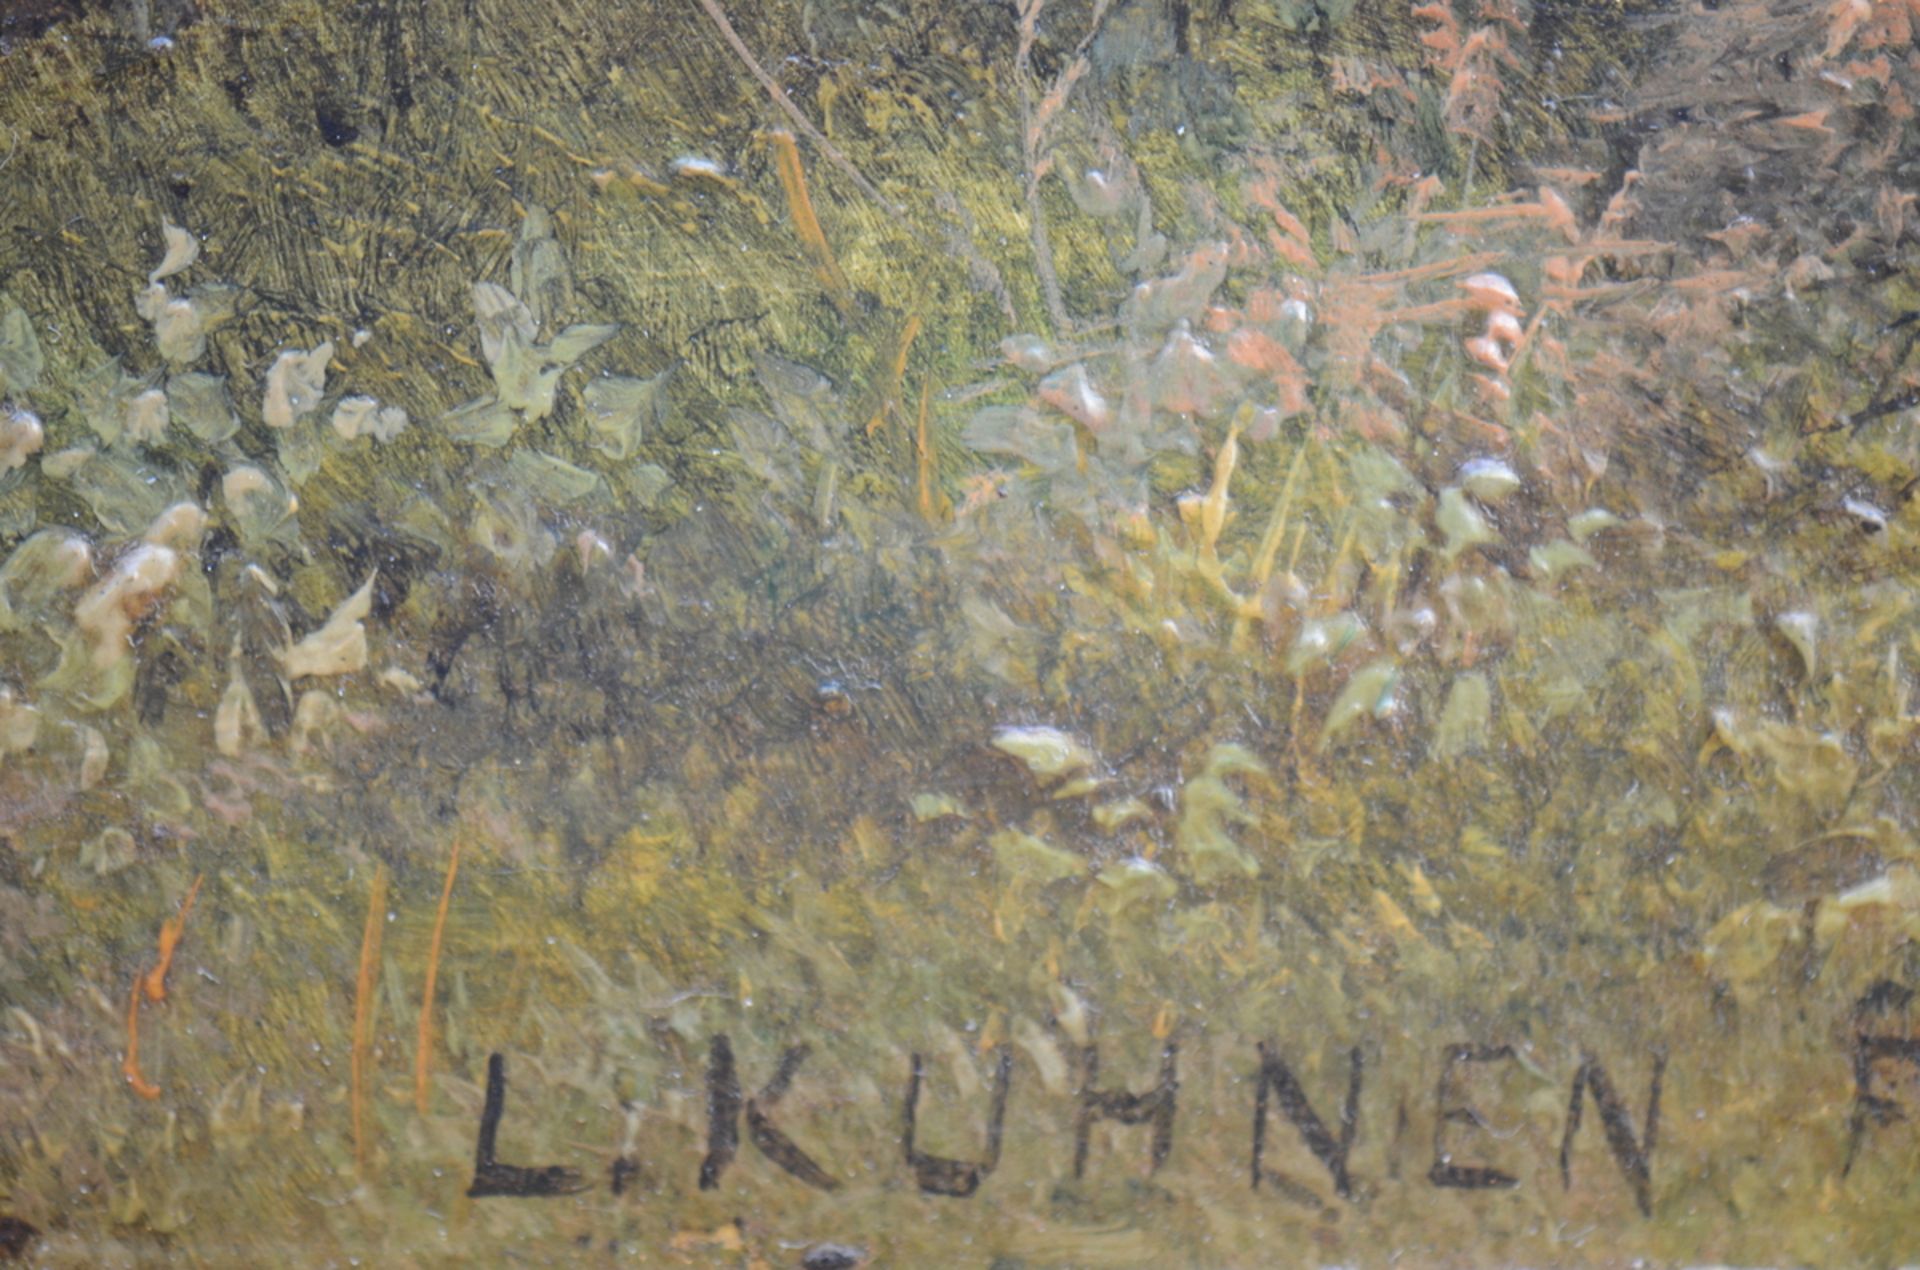 L. Kuhnen: painting (o/p) 'animated landscape' (35x47cm) - Image 6 of 7